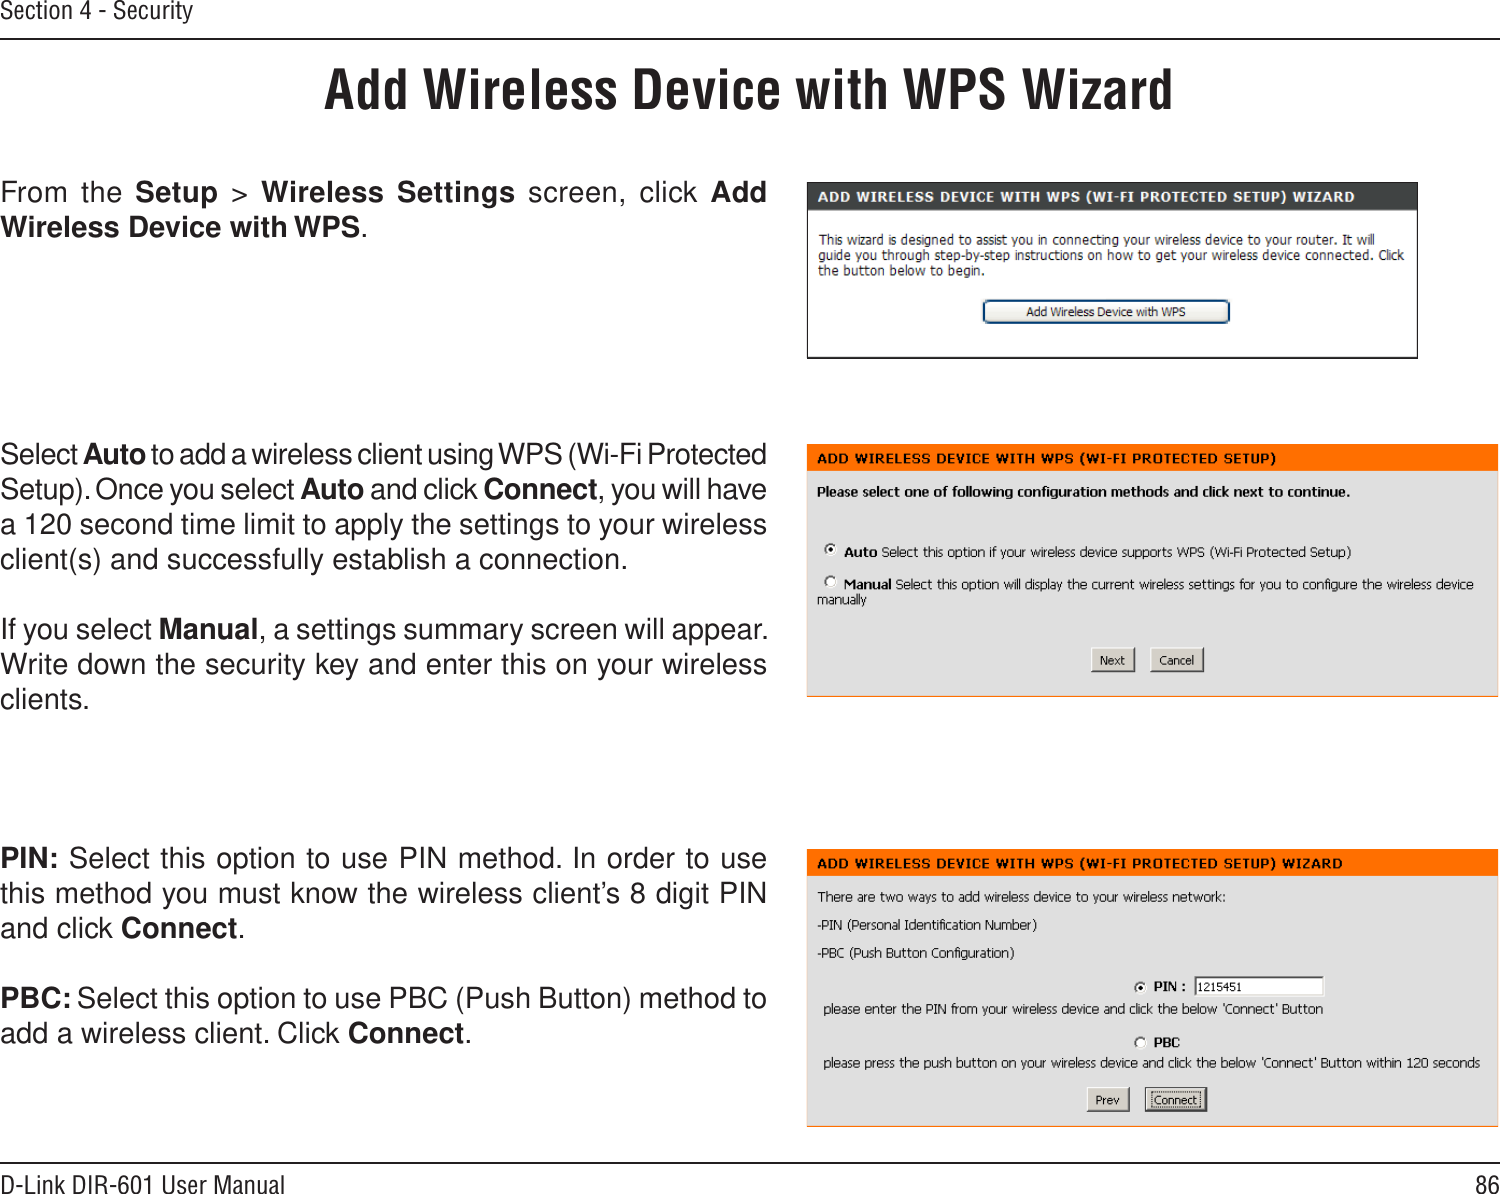 86D-Link DIR-601 User ManualSection 4 - SecurityFrom the Setup  &gt;  Wireless Settings screen, click Add Wireless Device with WPS.Add Wireless Device with WPS WizardPIN: Select this option to use PIN method. In order to use this method you must know the wireless client’s 8 digit PIN and click Connect.PBC: Select this option to use PBC (Push Button) method to add a wireless client. Click Connect.Select Auto to add a wireless client using WPS (Wi-Fi Protected Setup). Once you select Auto and click Connect, you will have a 120 second time limit to apply the settings to your wireless client(s) and successfully establish a connection. If you select Manual, a settings summary screen will appear. Write down the security key and enter this on your wireless clients. 